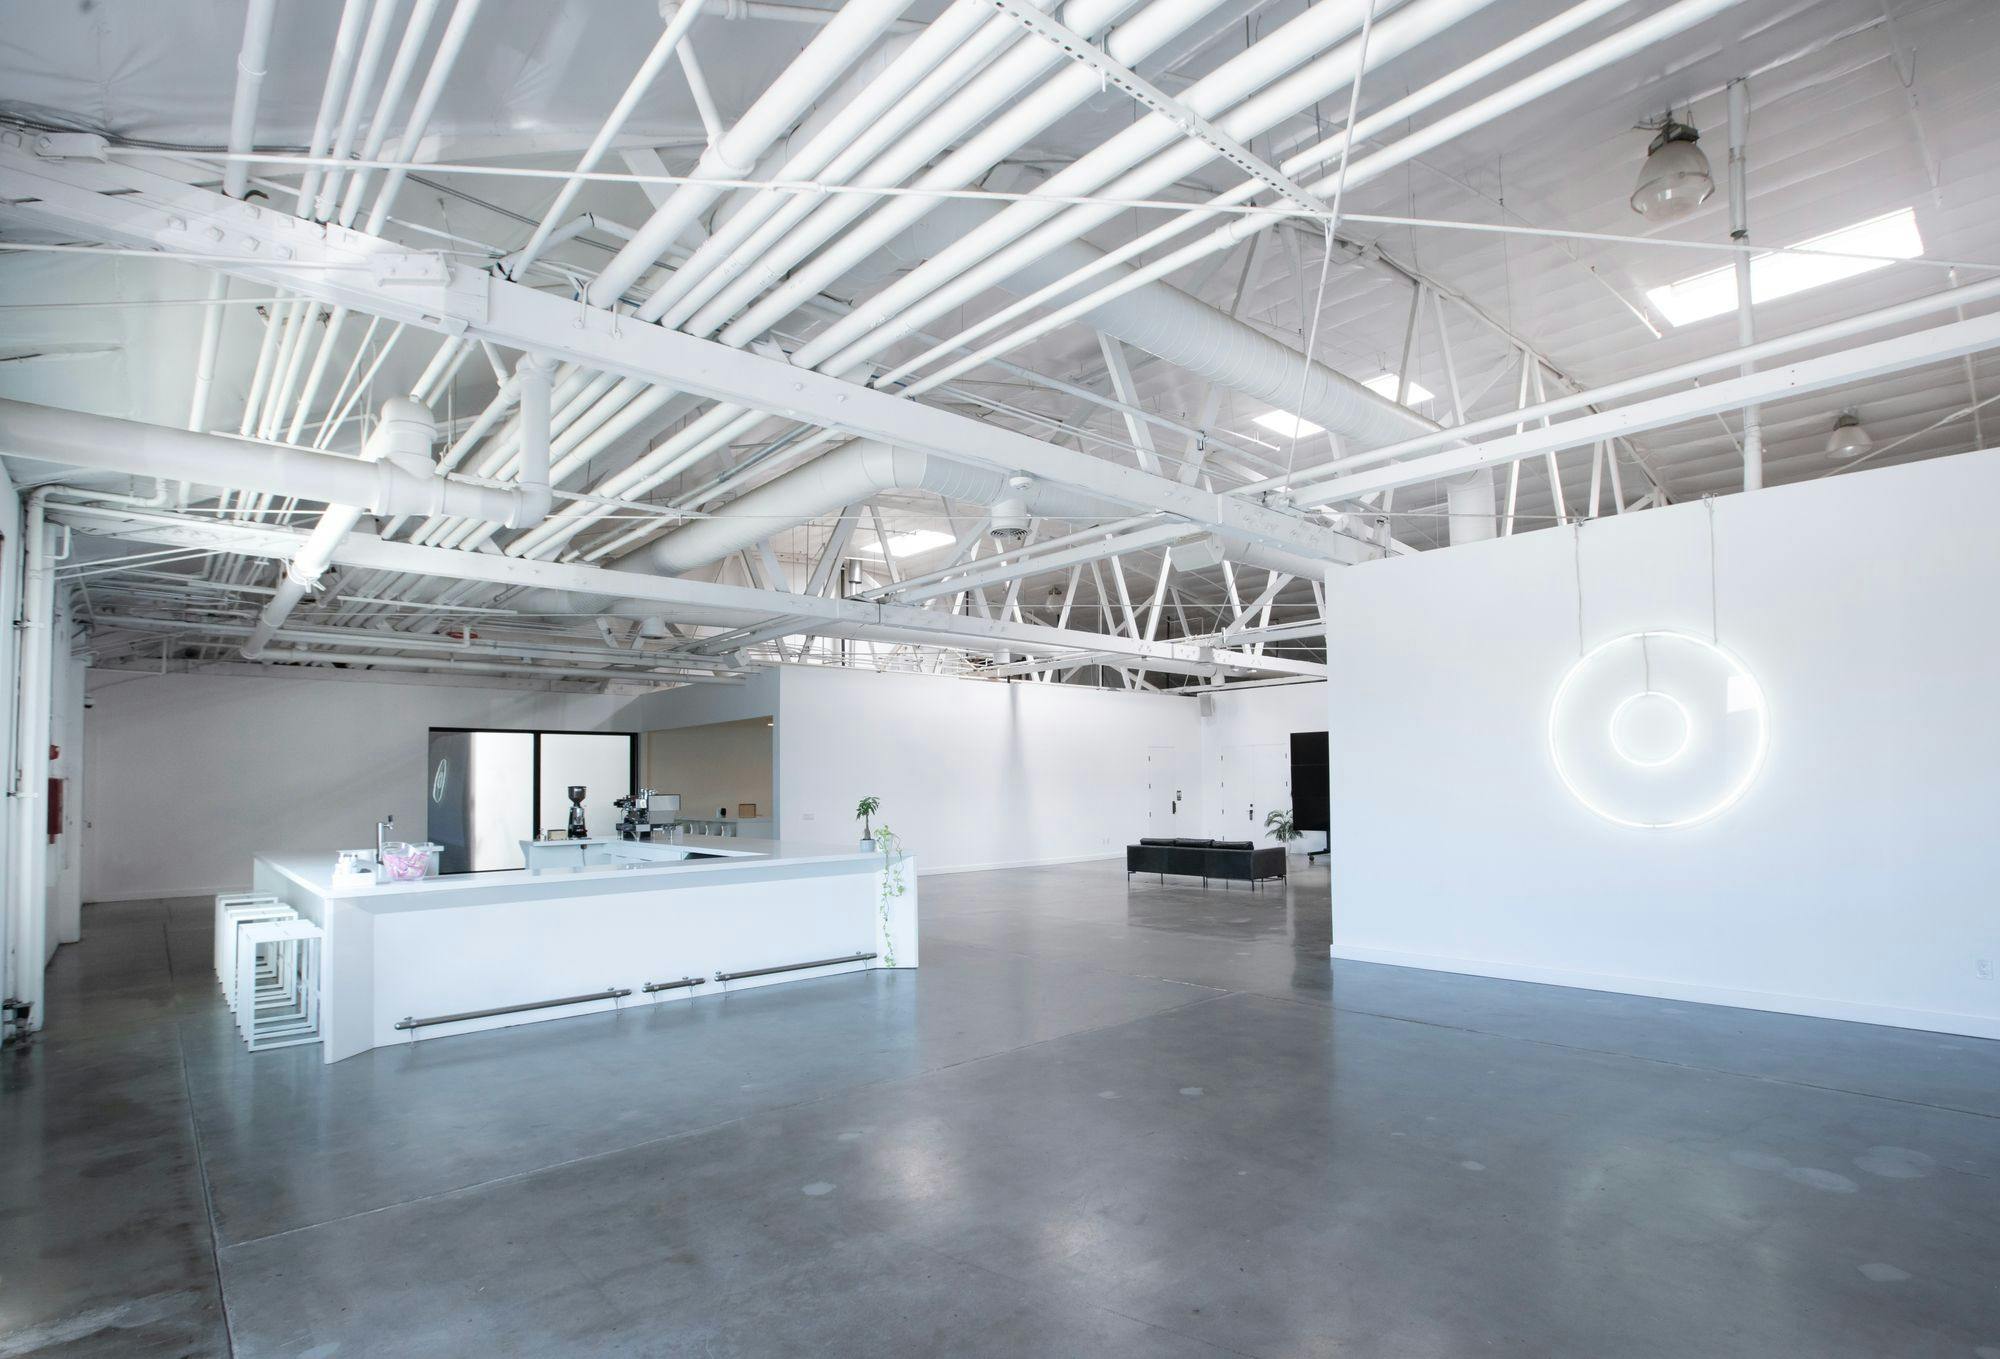 A spacious industrial-style gallery with white walls, high ceilings with exposed ductwork, and a minimalist bar area illuminated by a modern circular light fixture.